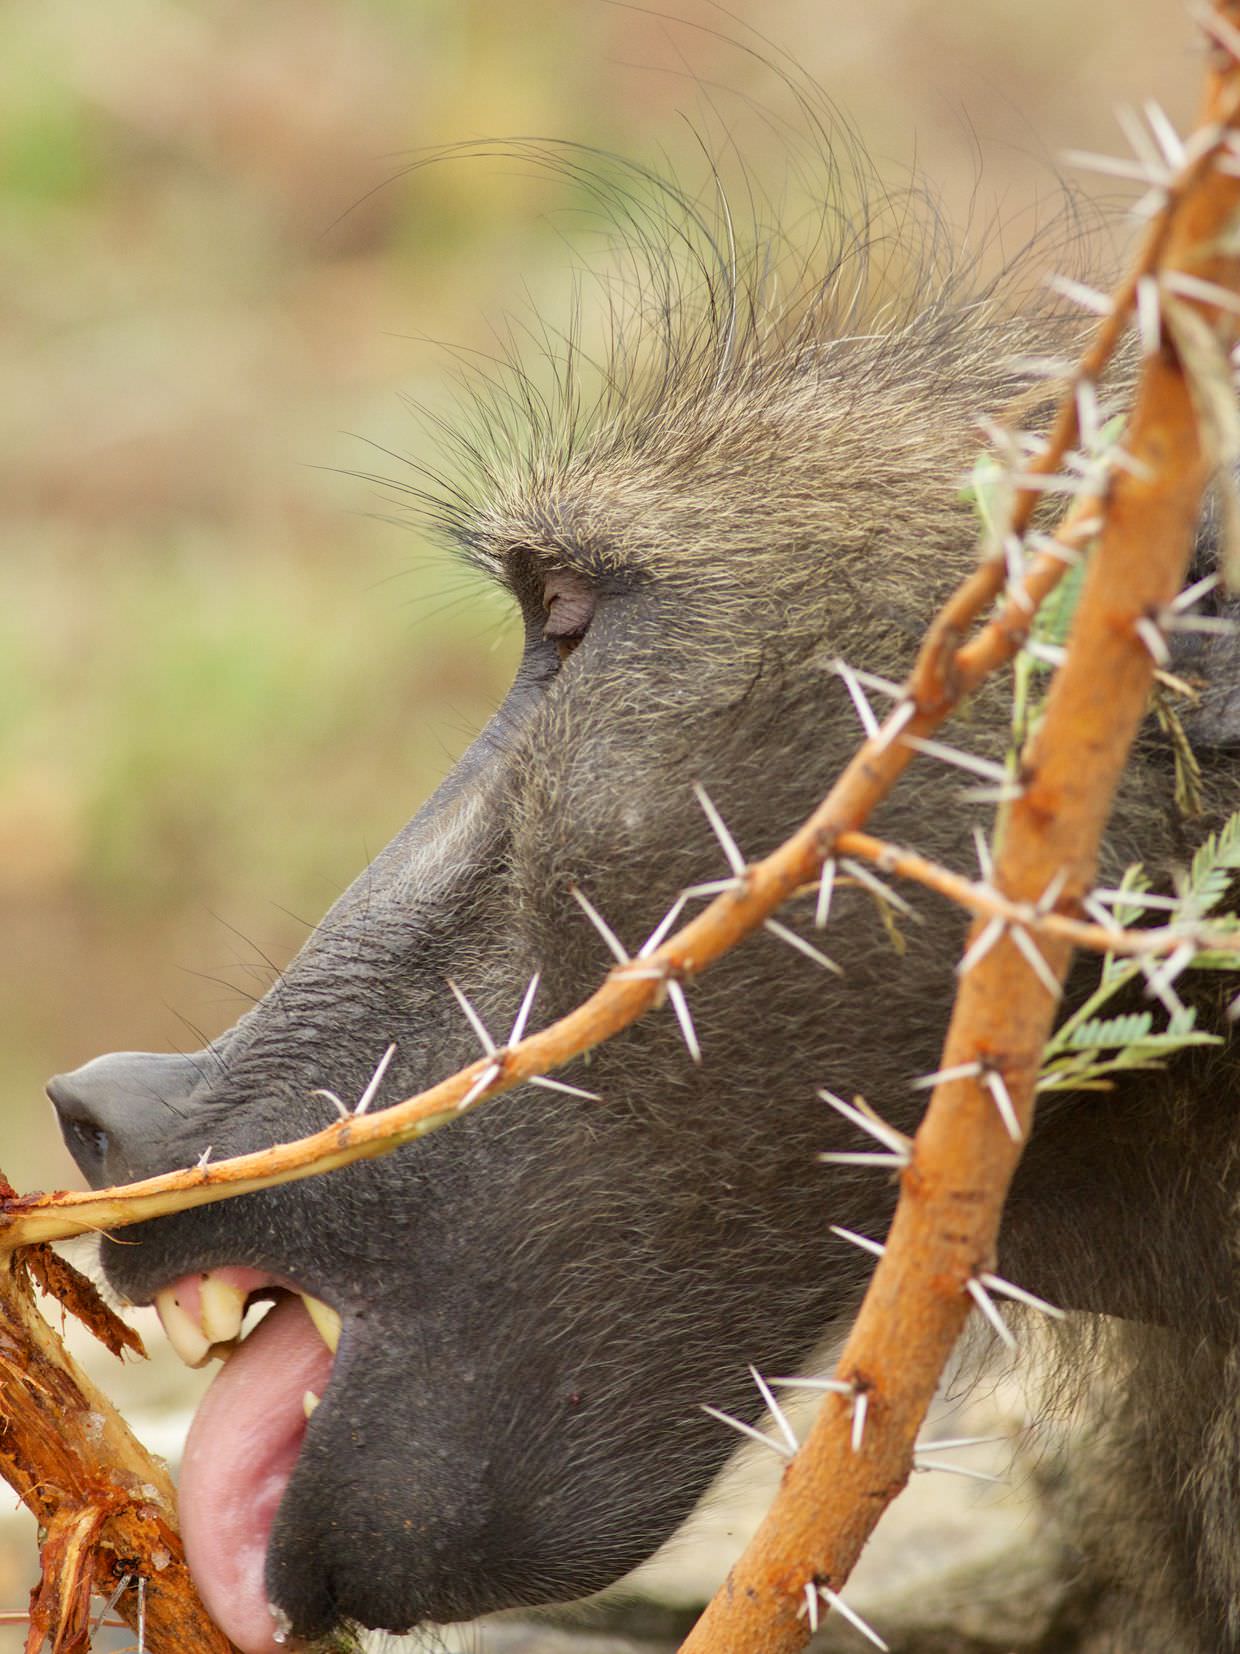 Baboon licking something thorny